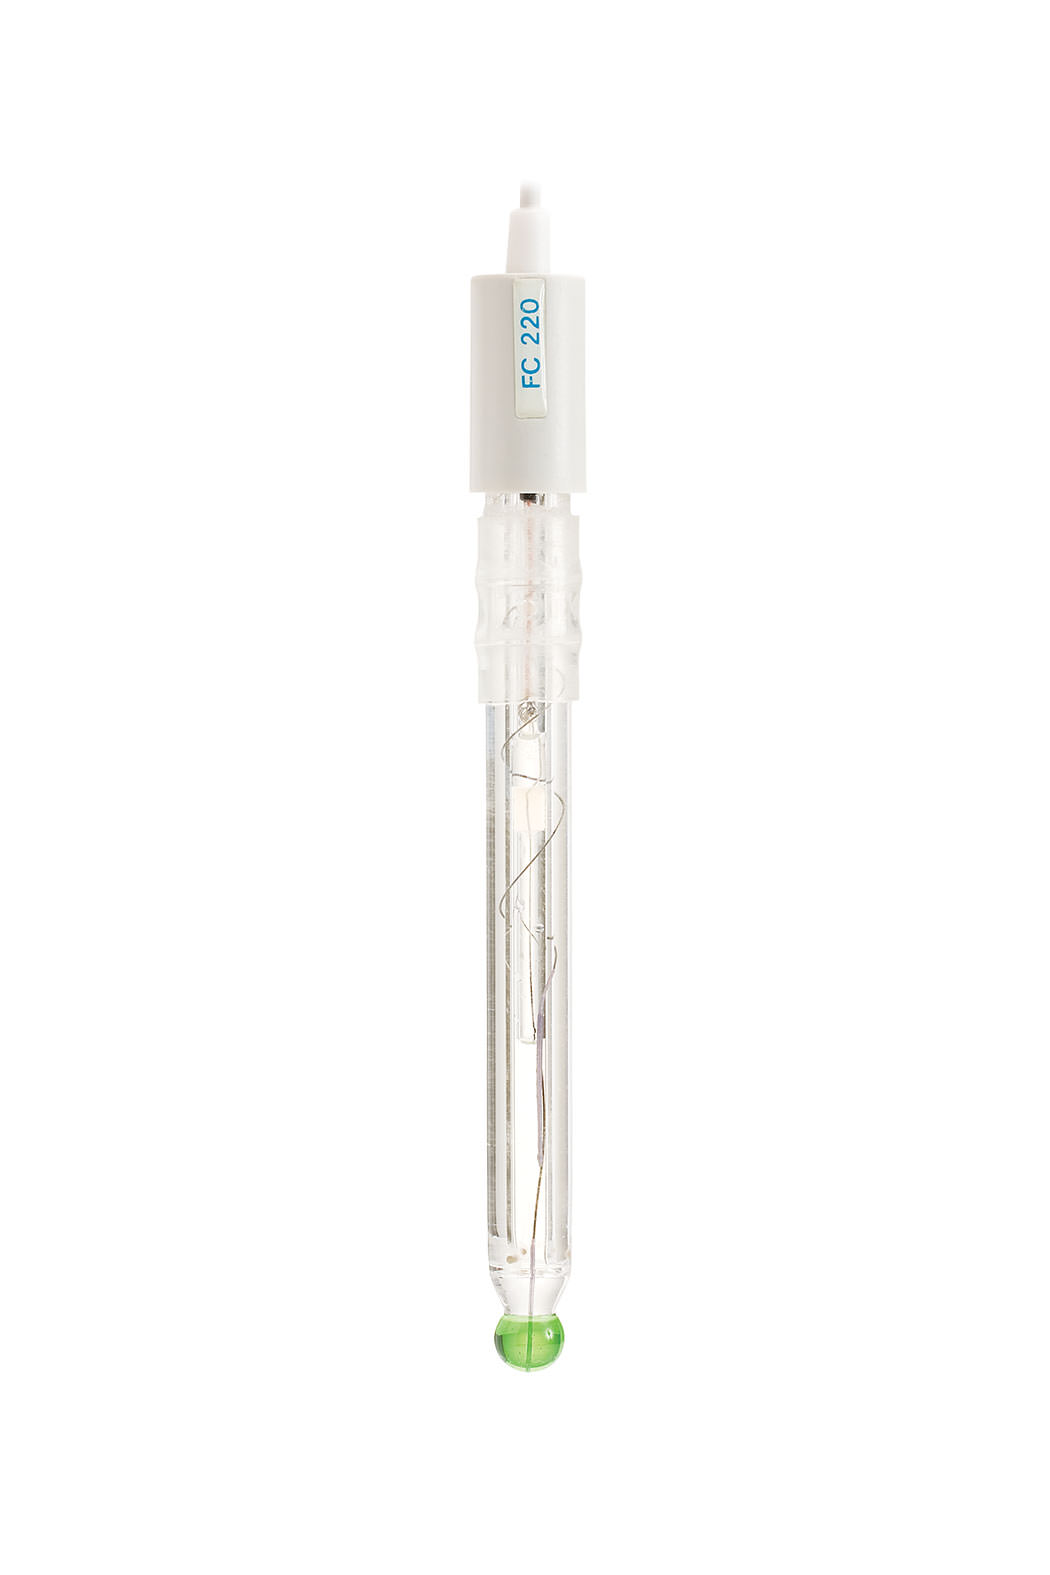 FC220B Foodcare pH Electrode for Creams, Sauces and Fruit Juices